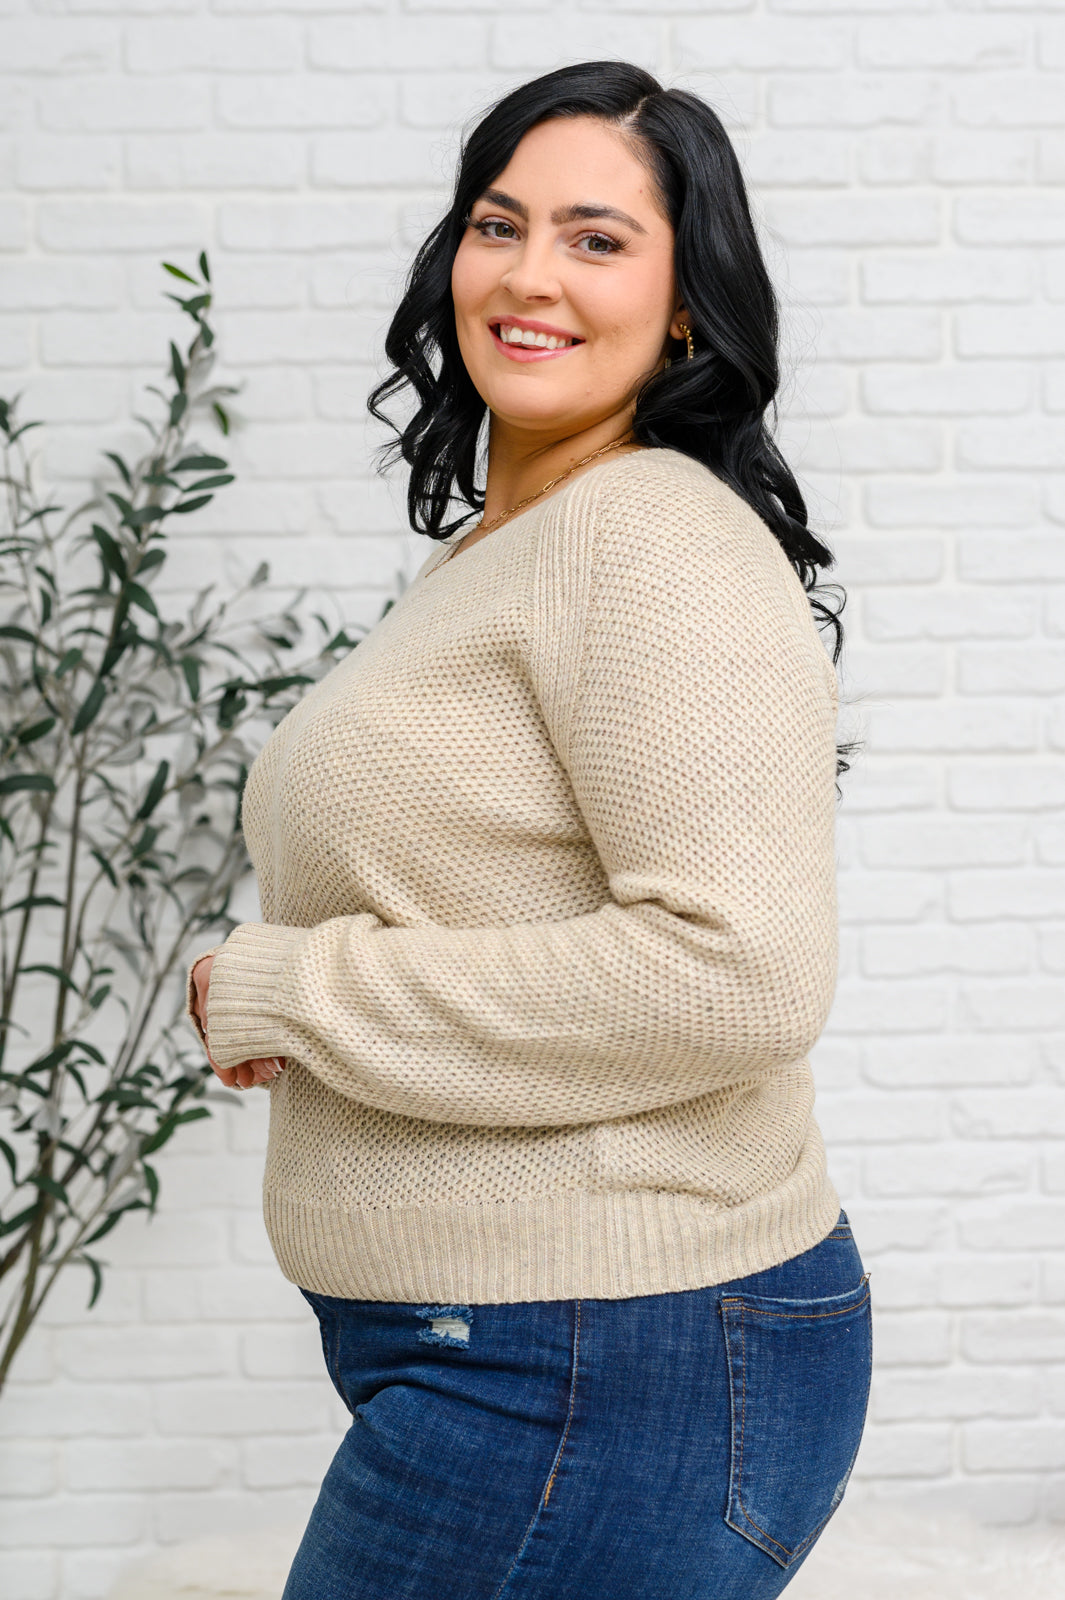 Chai Latte V-Neck Sweater in Oatmeal-Sweaters/Sweatshirts-Inspired by Justeen-Women's Clothing Boutique in Chicago, Illinois